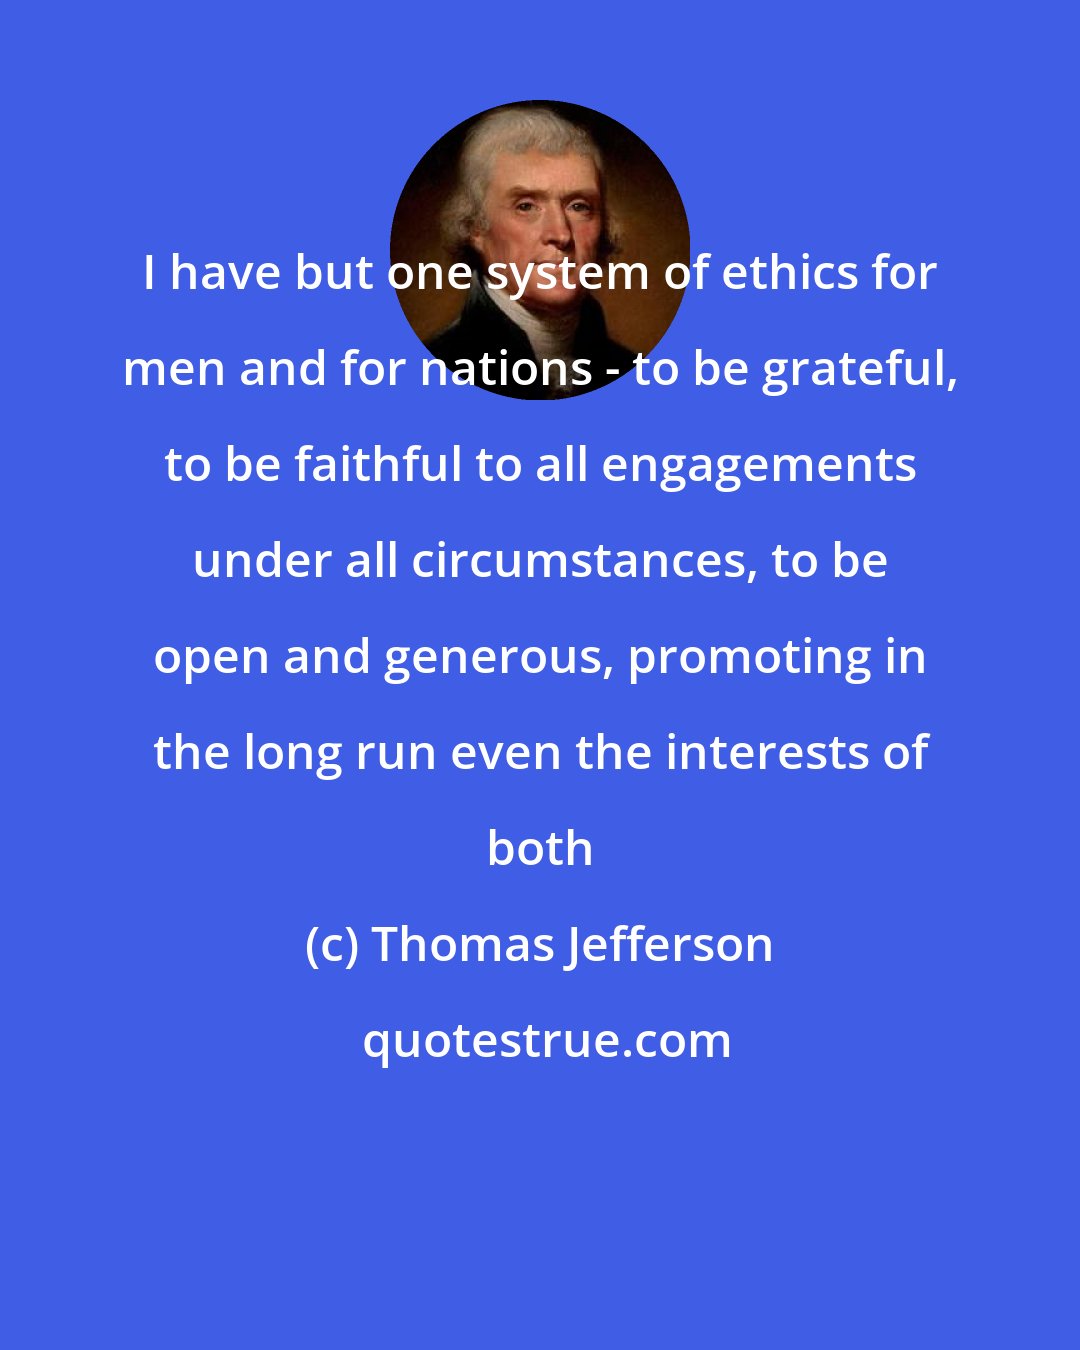 Thomas Jefferson: I have but one system of ethics for men and for nations - to be grateful, to be faithful to all engagements under all circumstances, to be open and generous, promoting in the long run even the interests of both